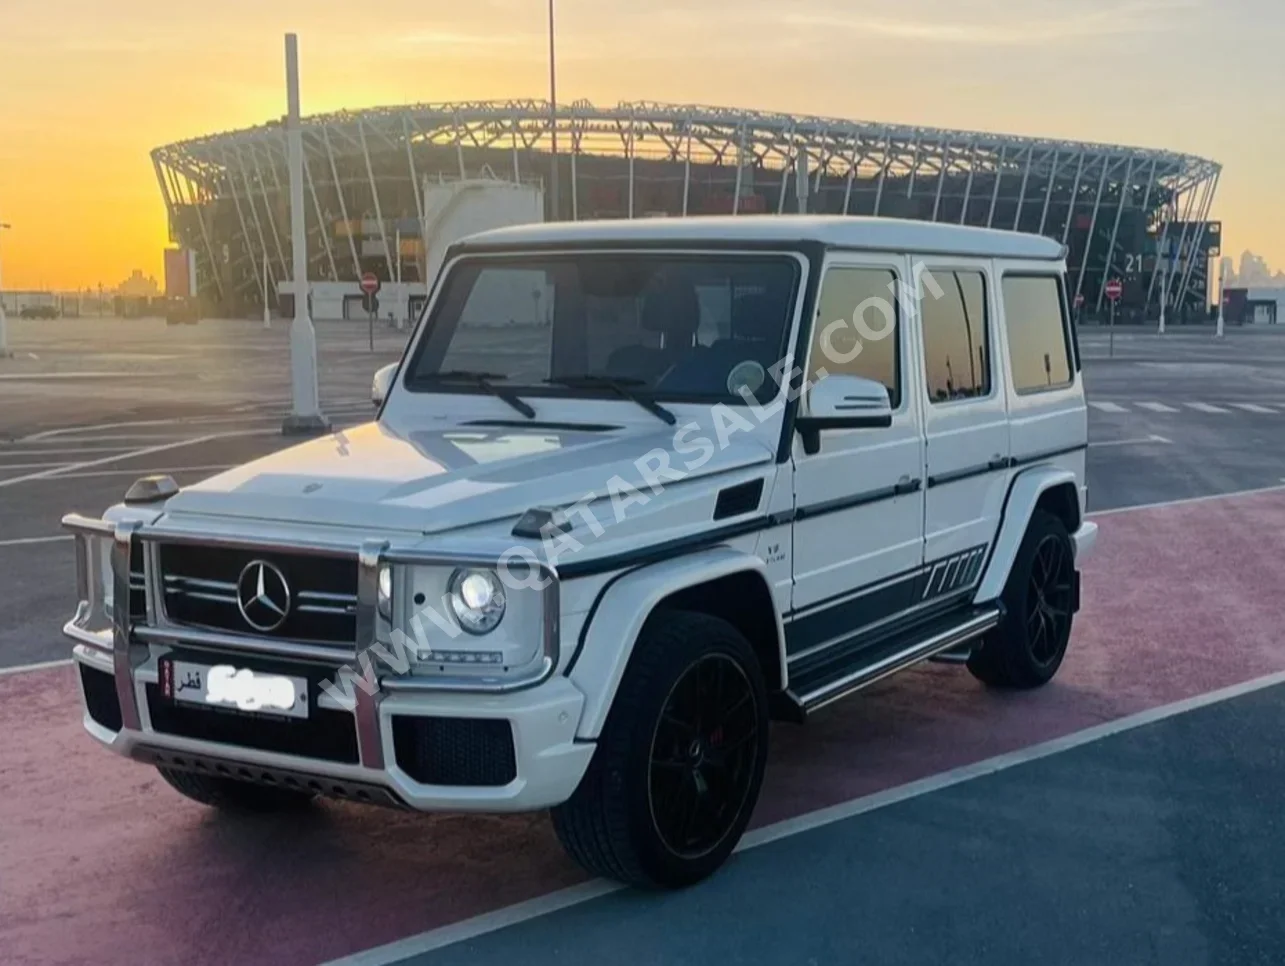 Mercedes-Benz  G-Class  63 AMG  2016  Automatic  98,000 Km  8 Cylinder  Four Wheel Drive (4WD)  SUV  White